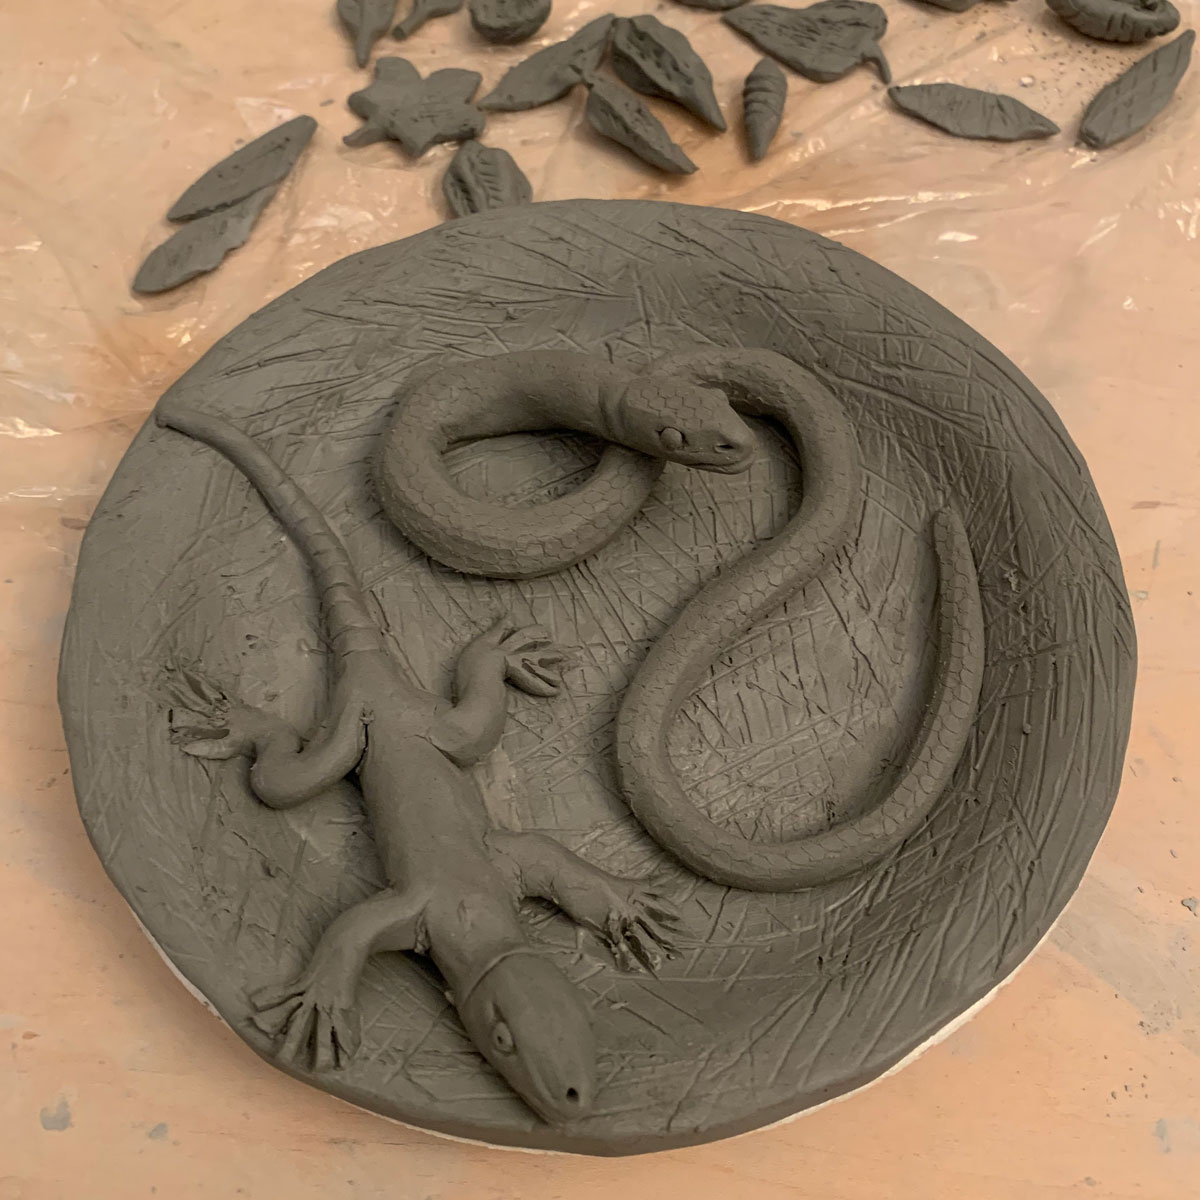 Clay lizard and snake on a clay plate